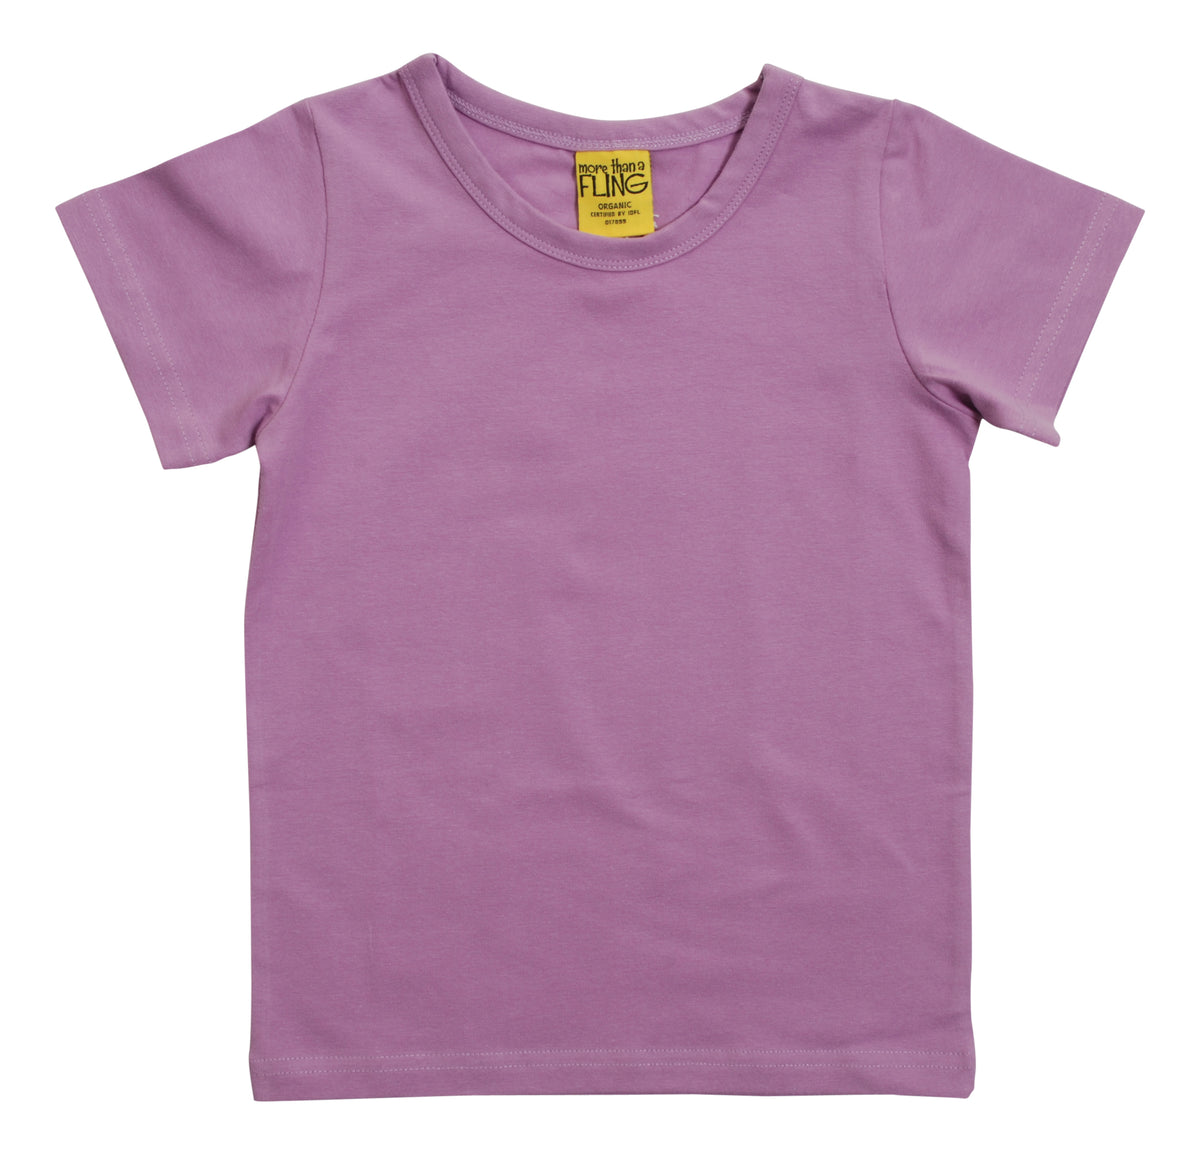 More Than A Fling T Shirt Violet Tulle